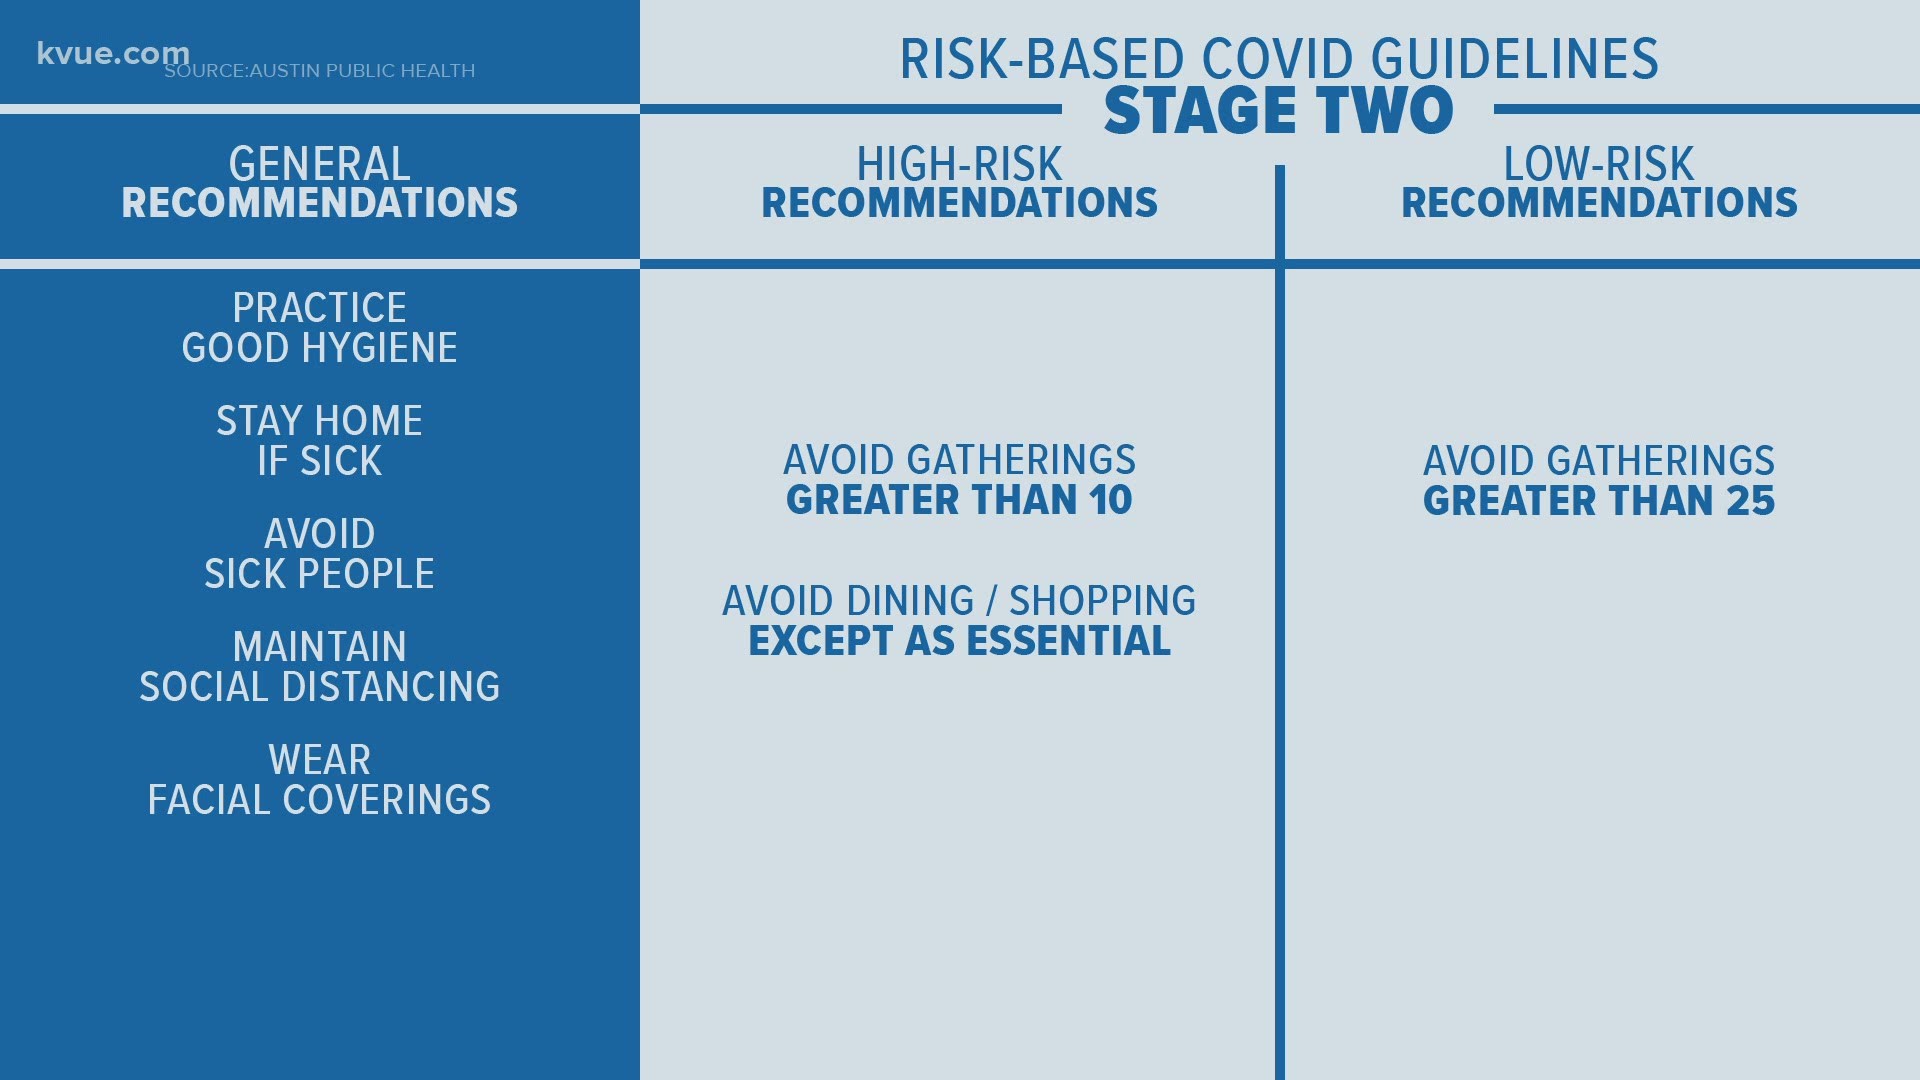 Research shows that Austin could move back into Stage 2 of the COVID-19 risk-based guidelines by mid-April because hospitalizations keep dropping.